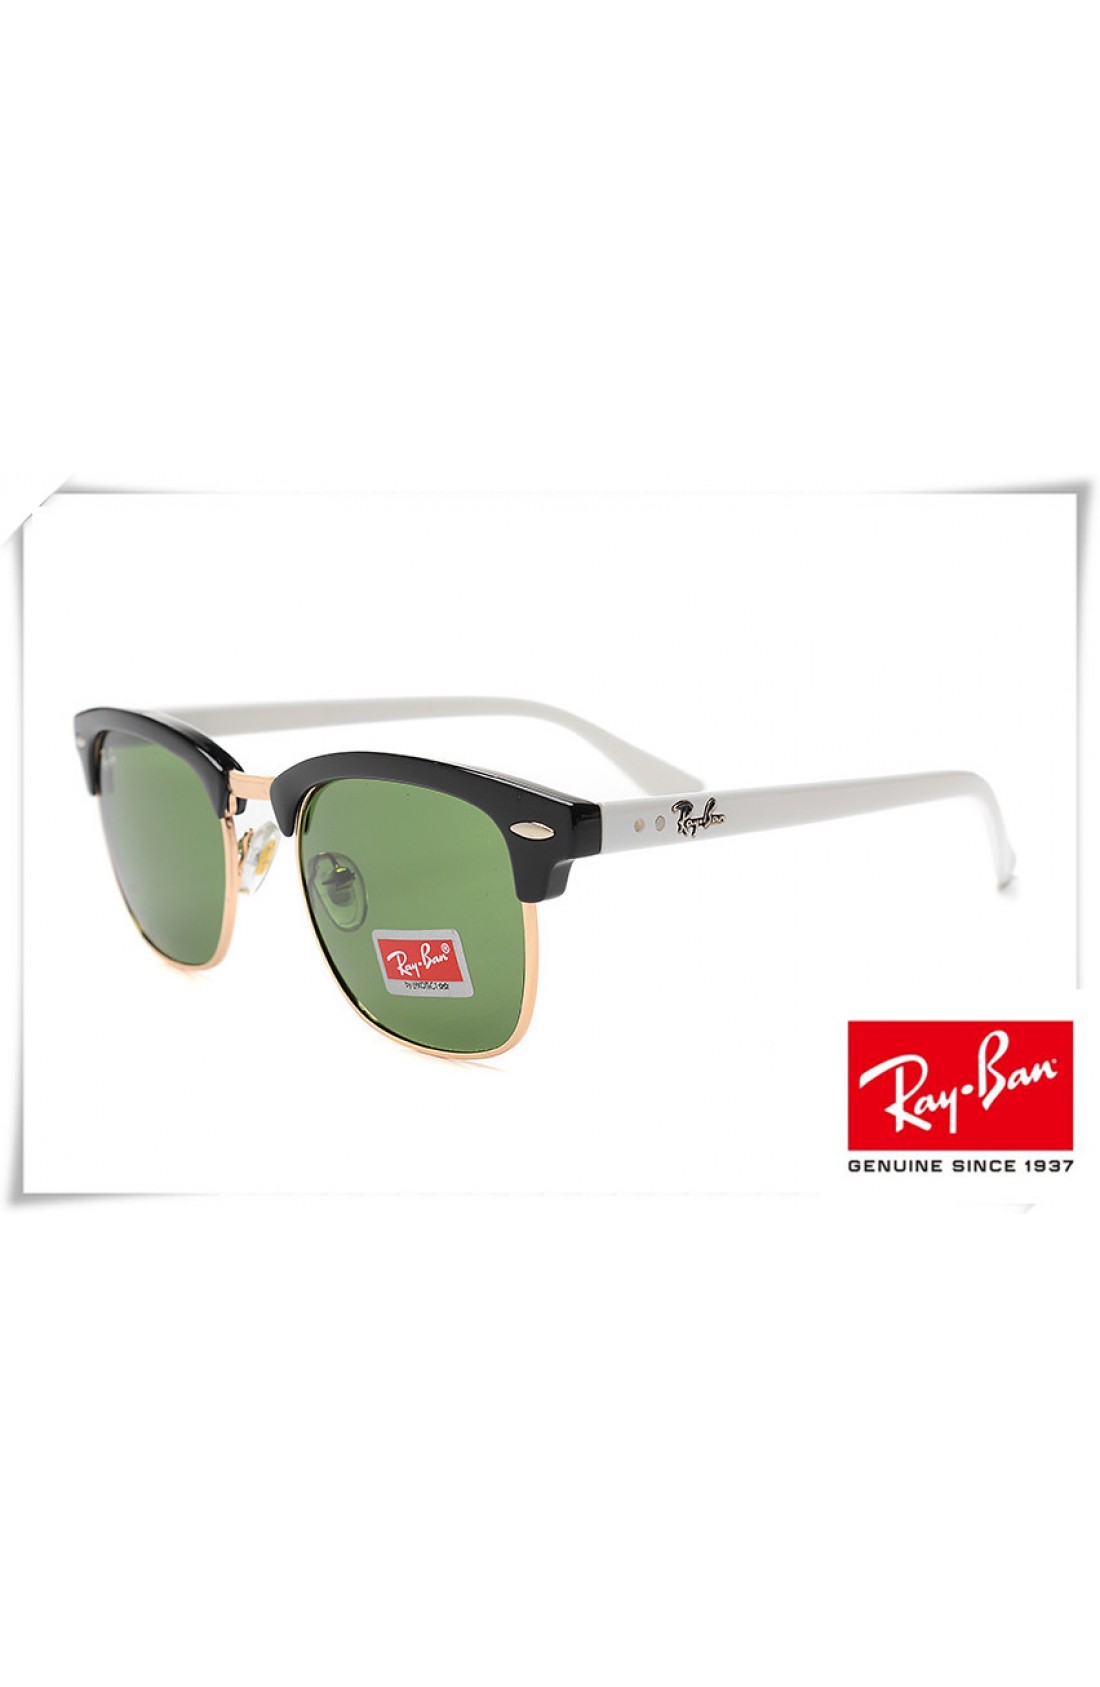 ray ban rb3016 classic clubmaster